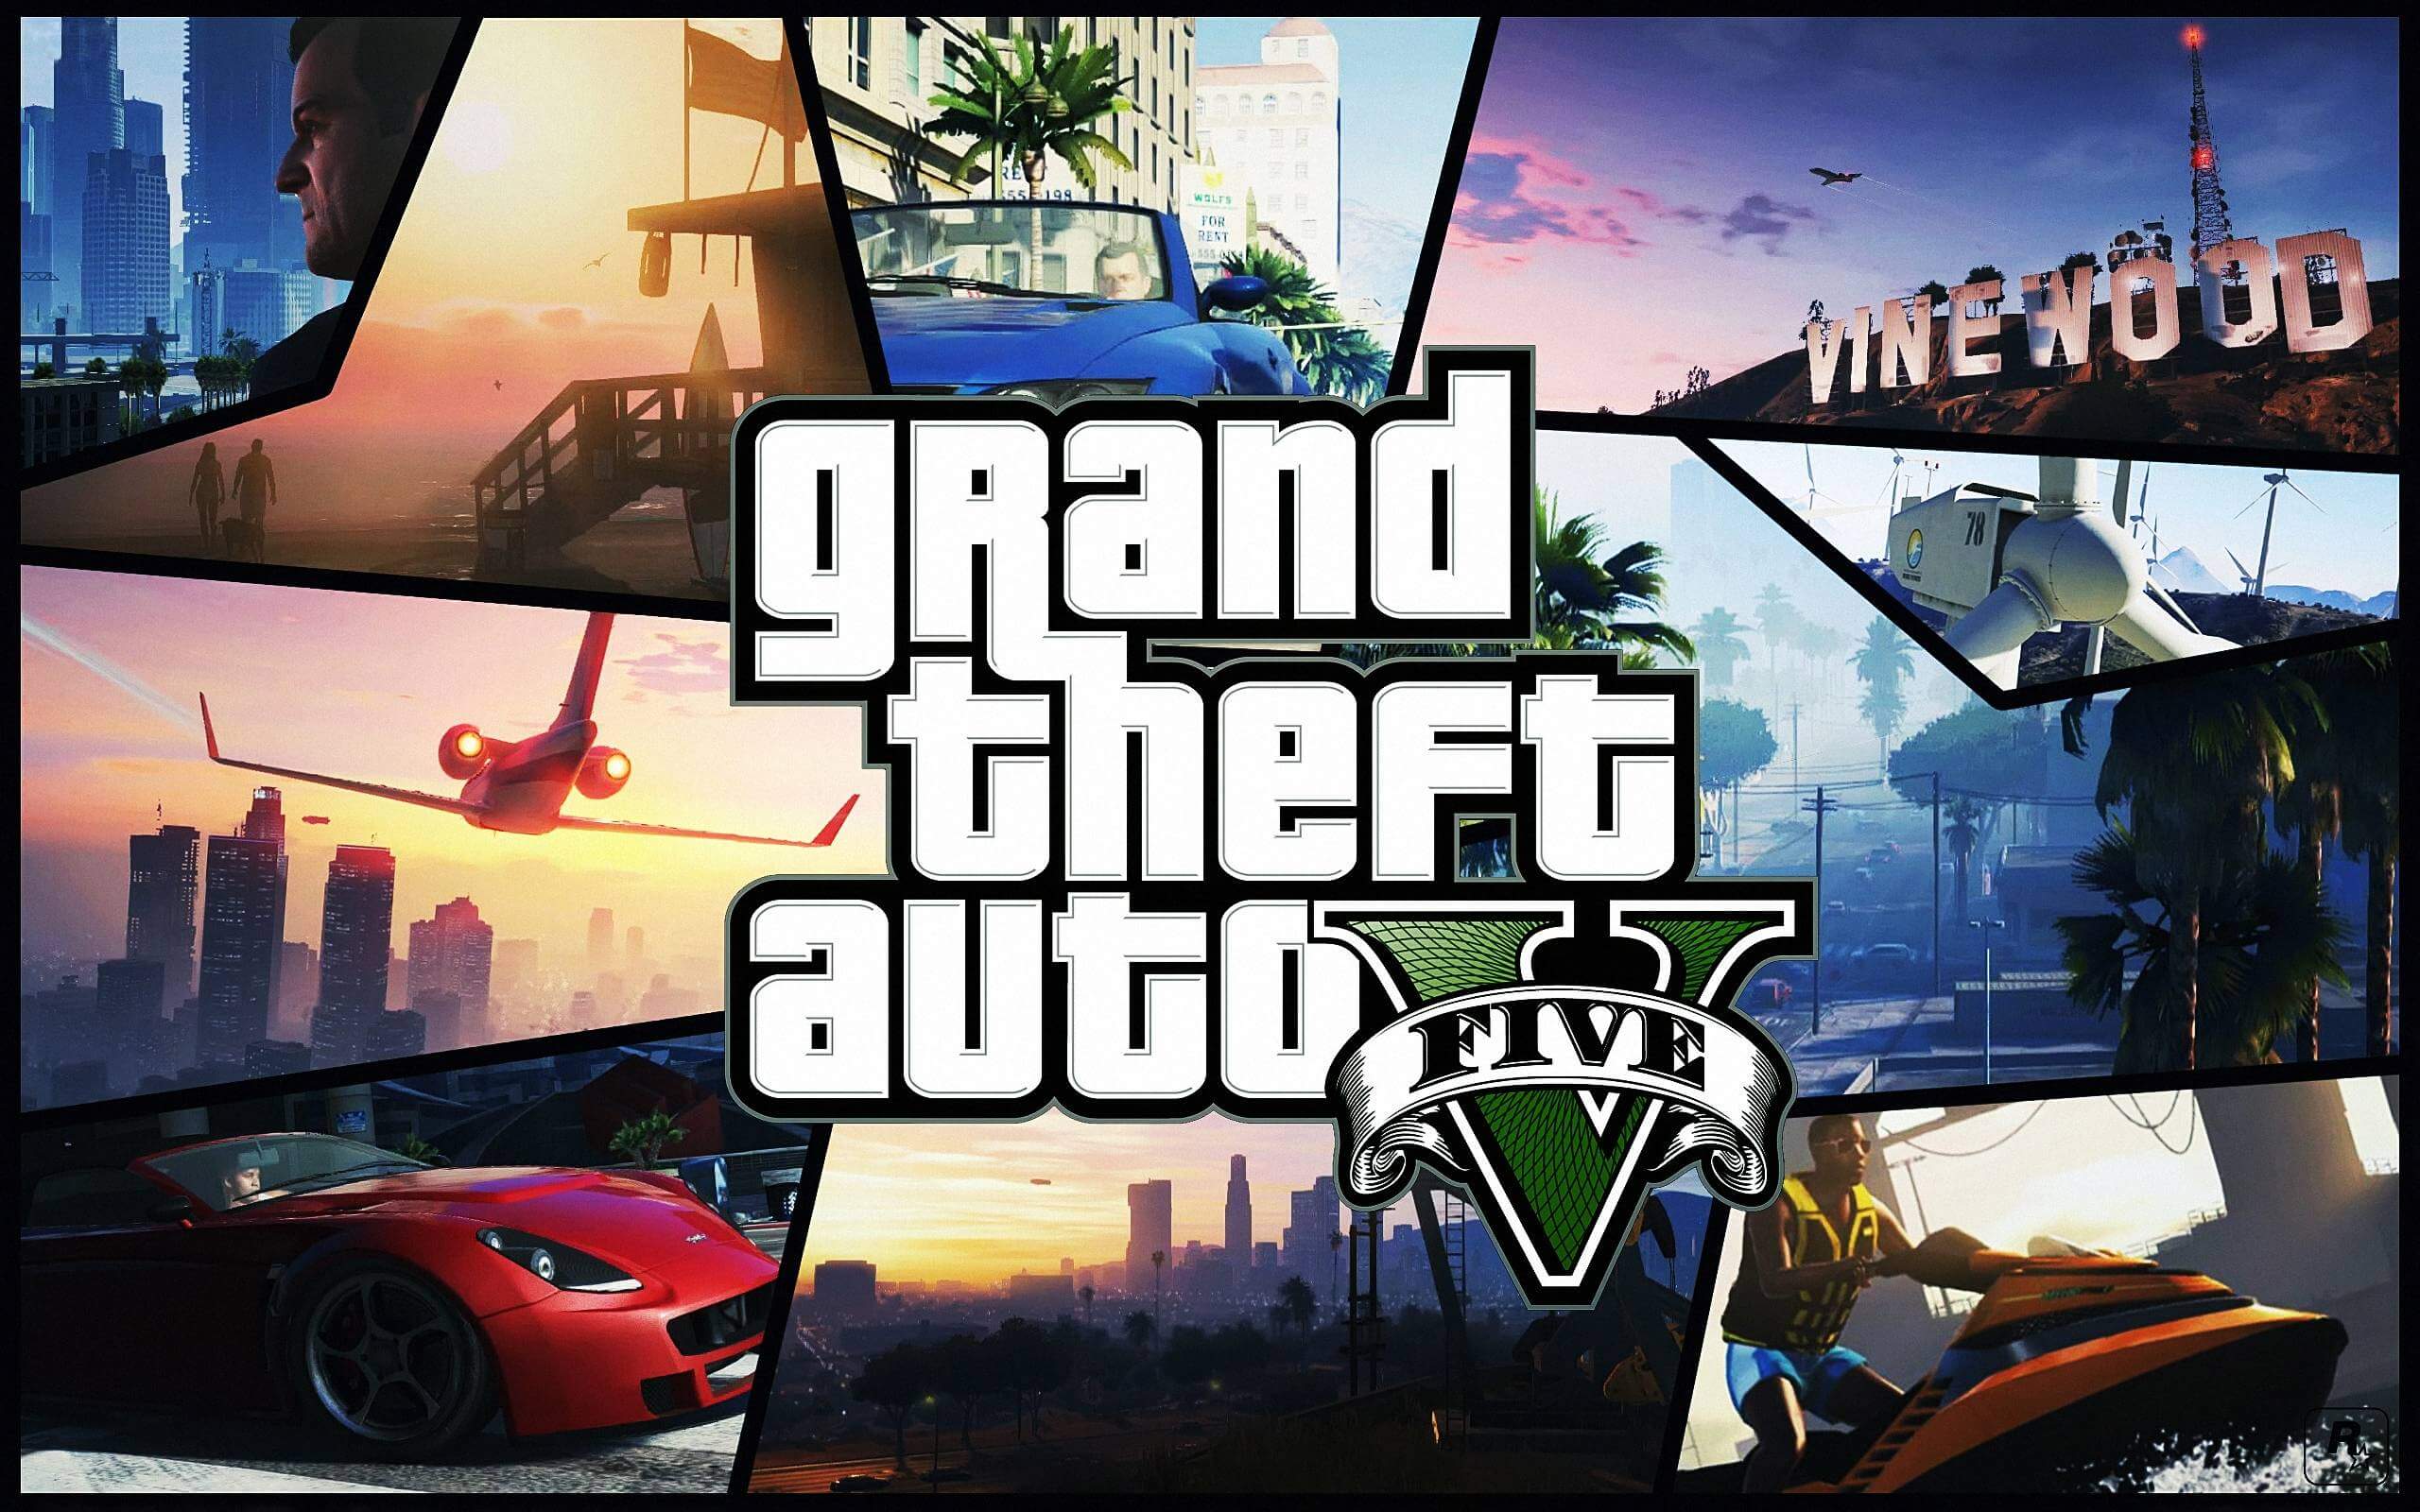 “Las Venturas Project” – GTA 5 receives map expansion from San Andreas